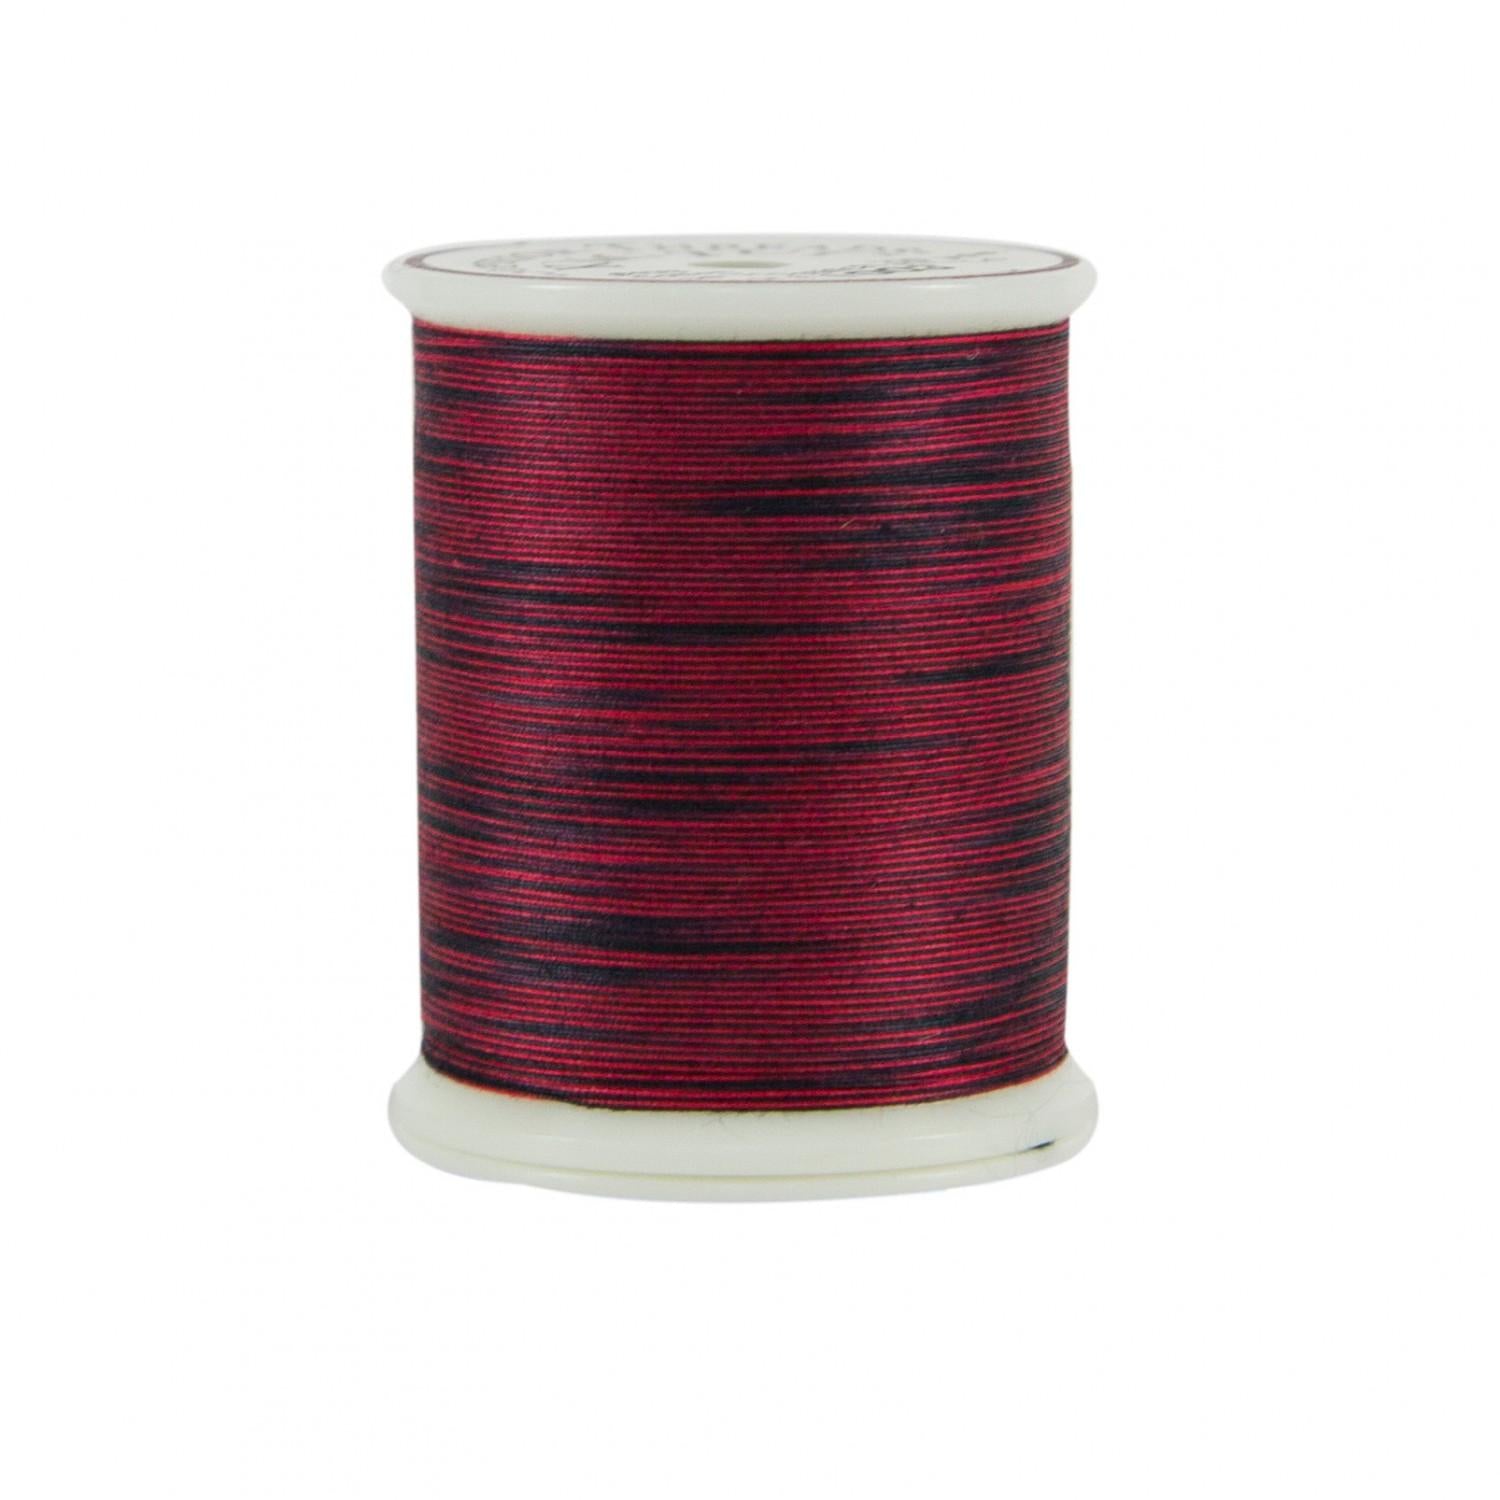 King Tut Cotton Quilting Thread 500yds - Glowing Embers # 12101-1003